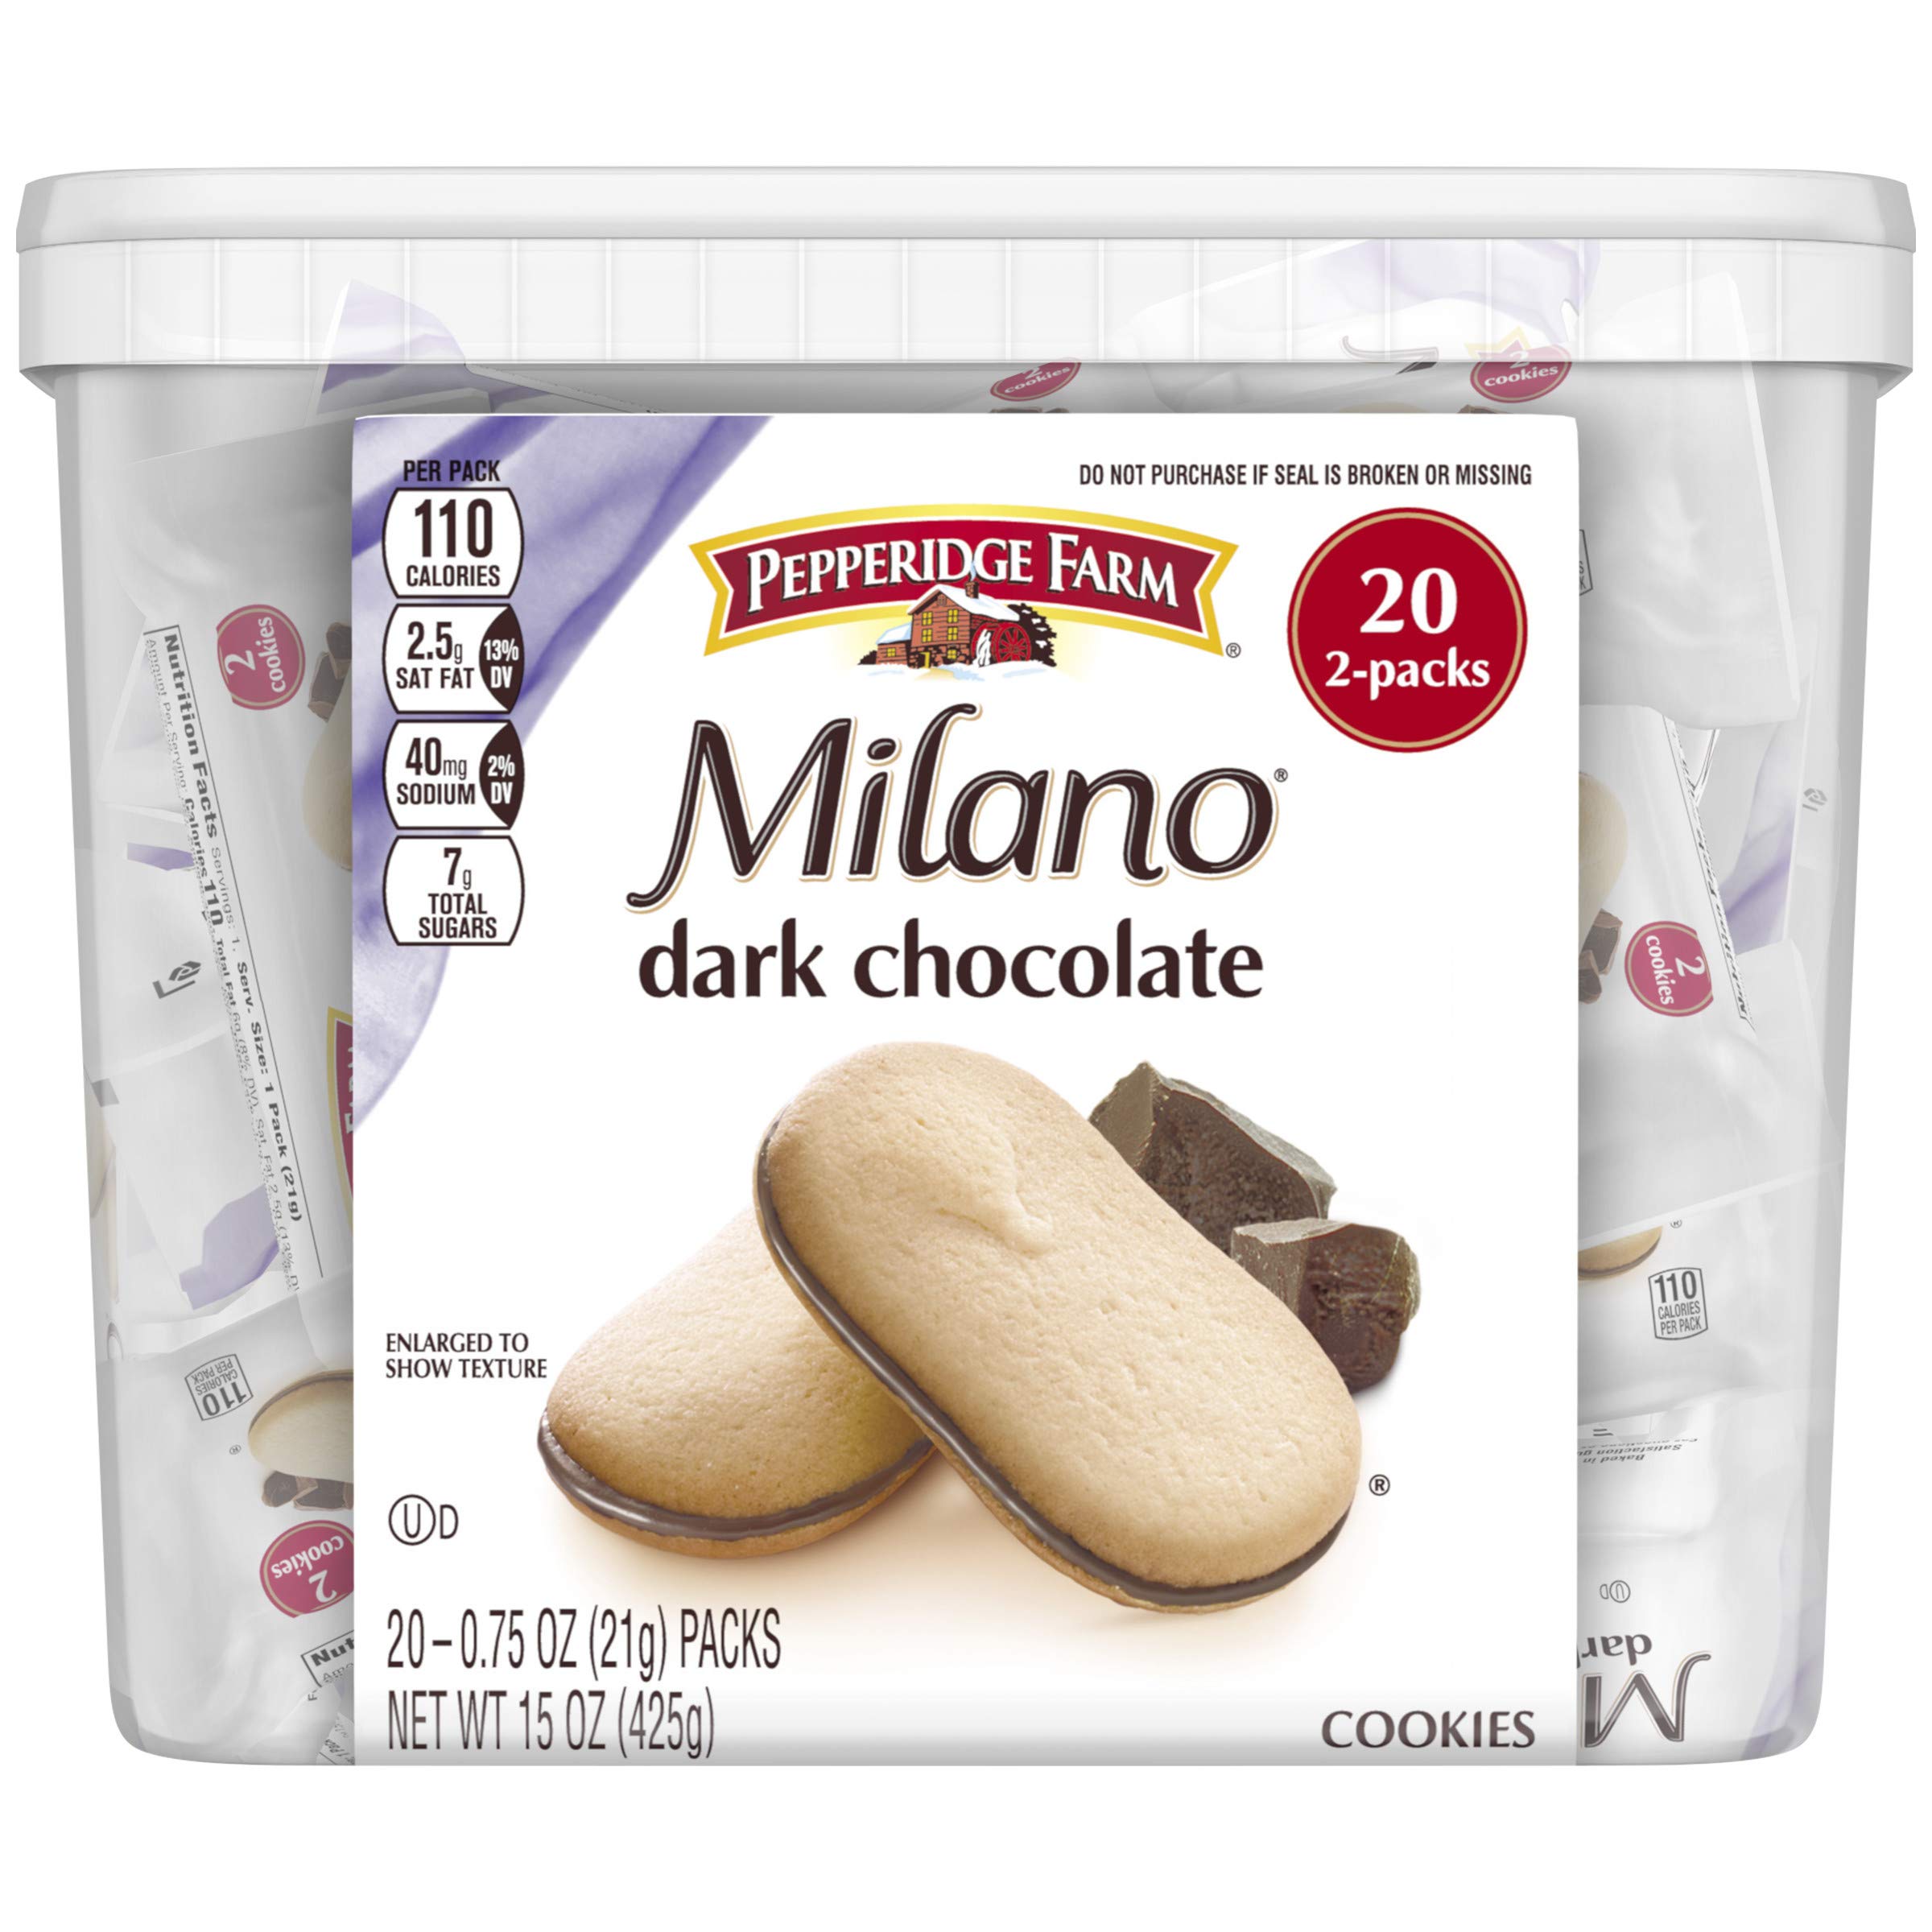 20-Count Pepperidge Farm Milano Cookie Tub (Dark Chocolate) $7.17 + Free Shipping w/ Prime or on orders over $35